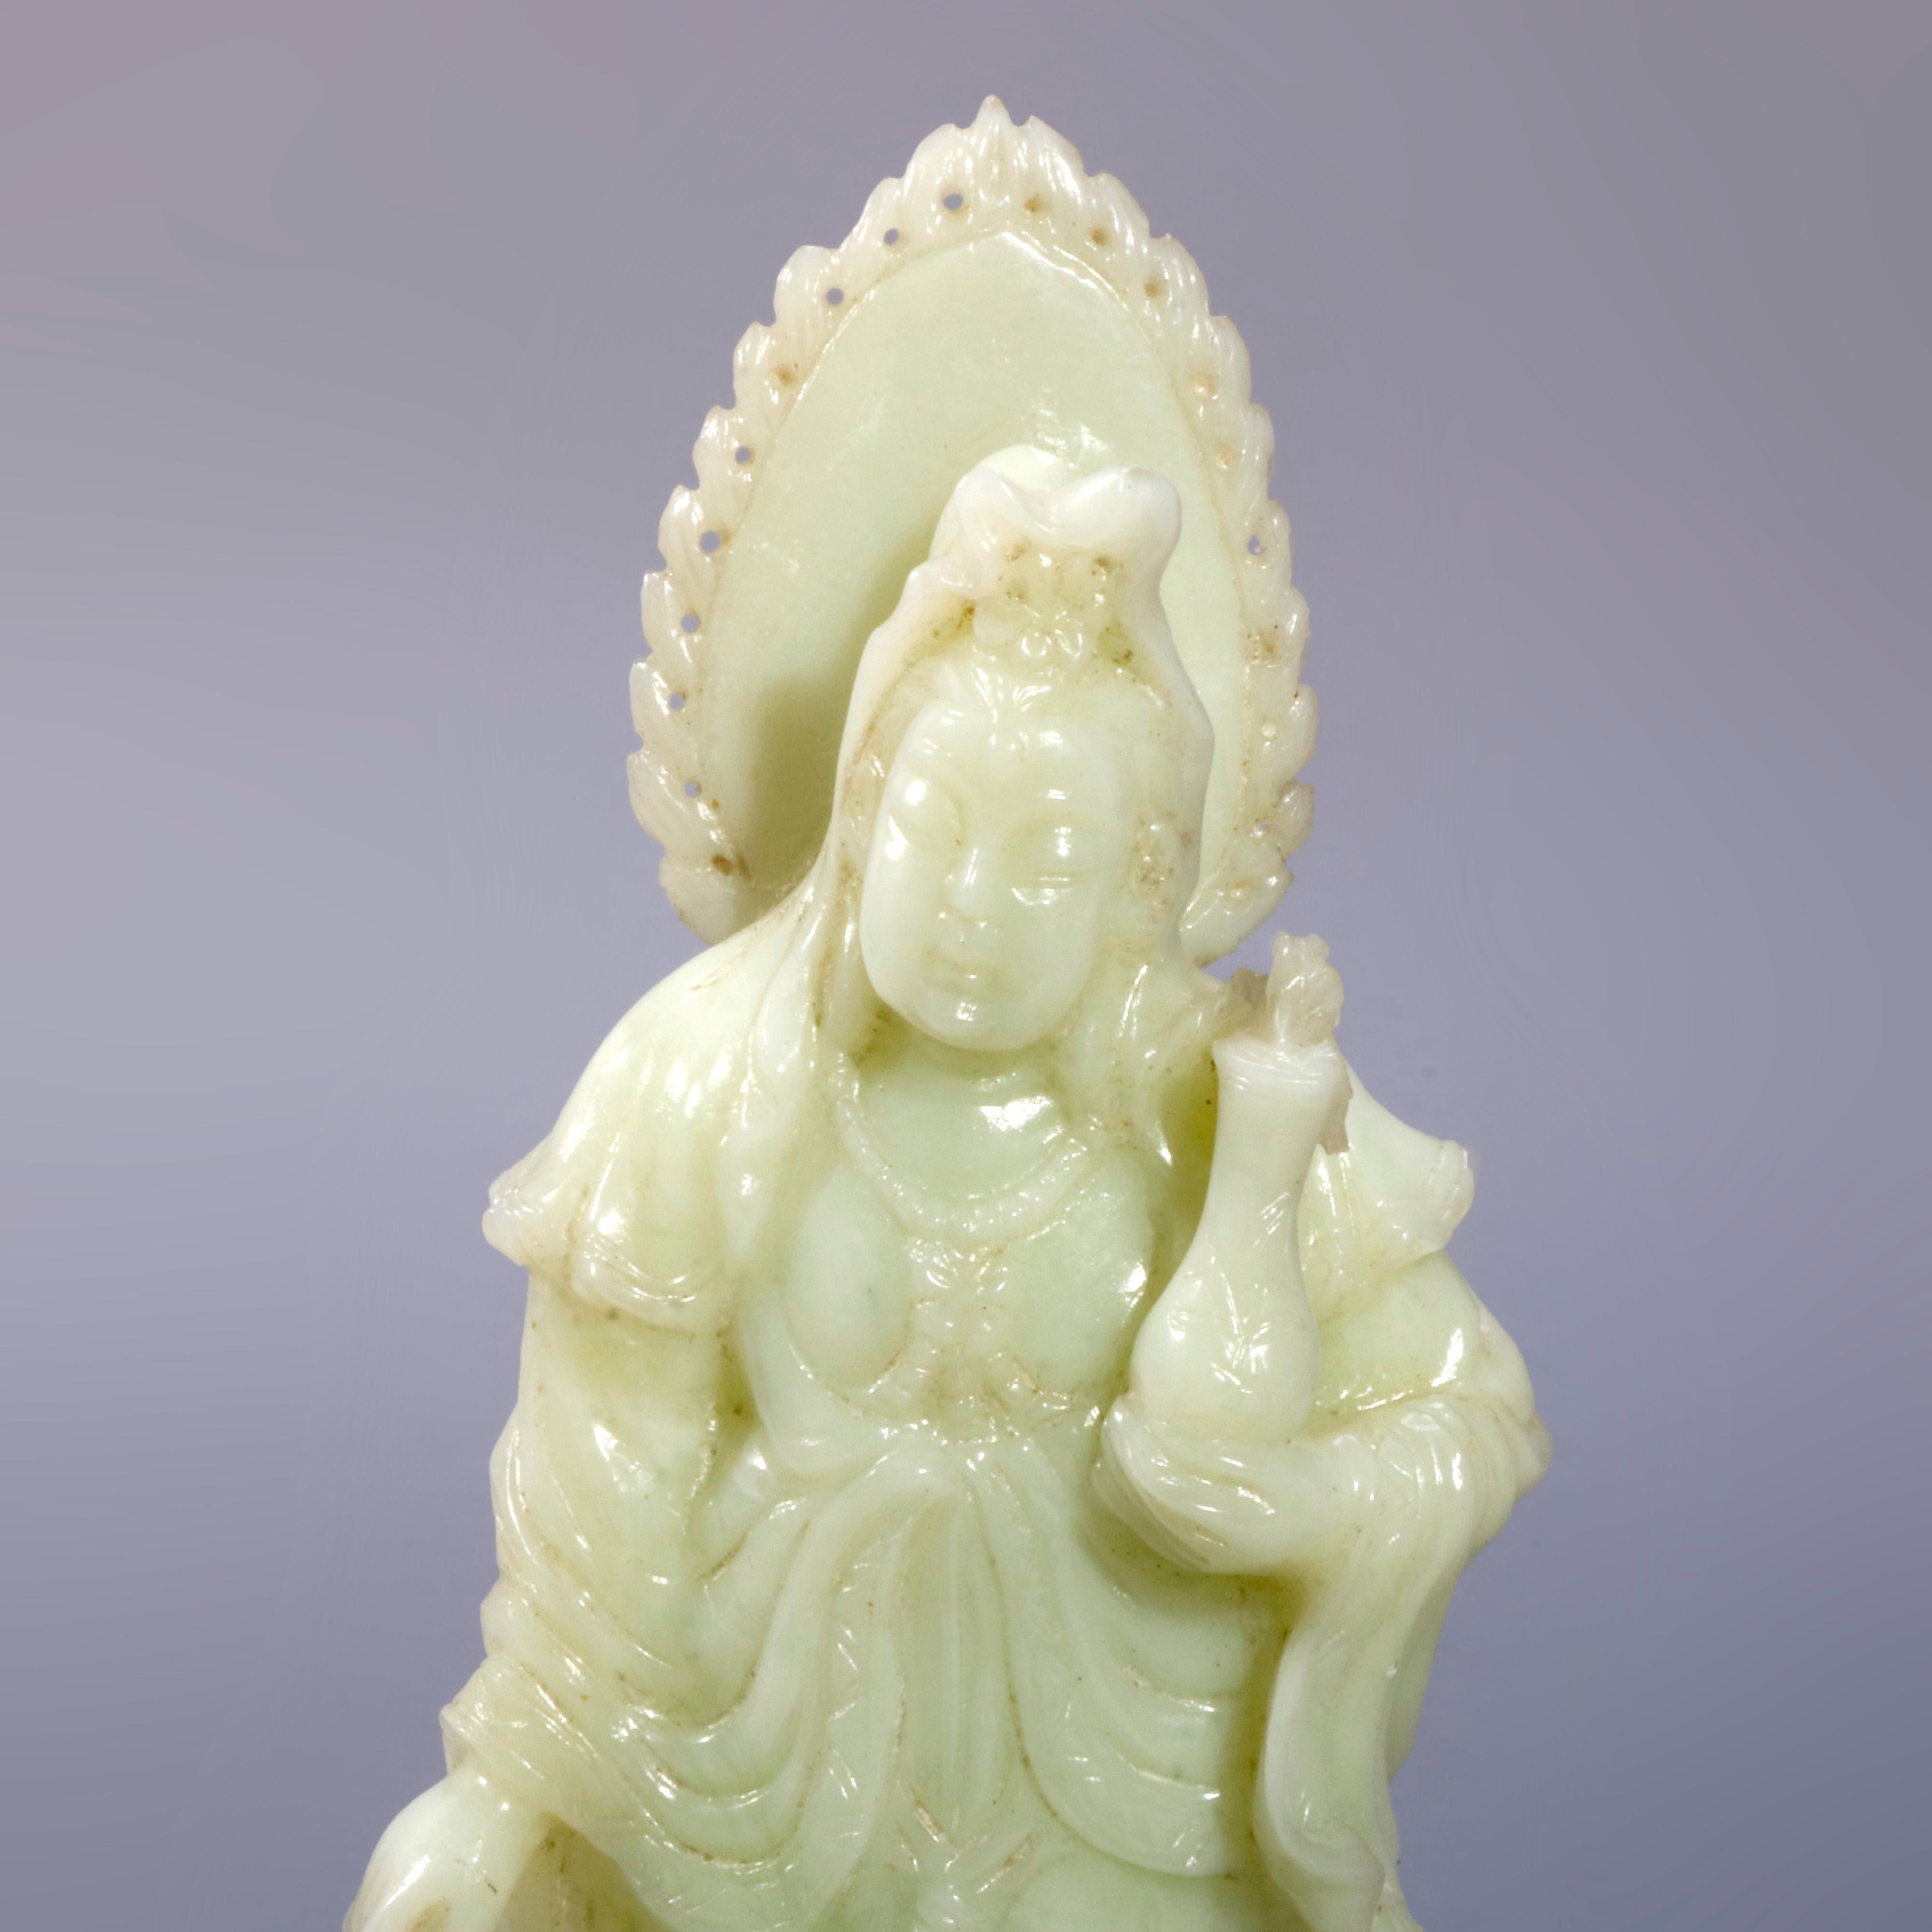 An antique Chinese carved jadeite figure of woman with vase on hardwood base, 20th century

Measures- 8